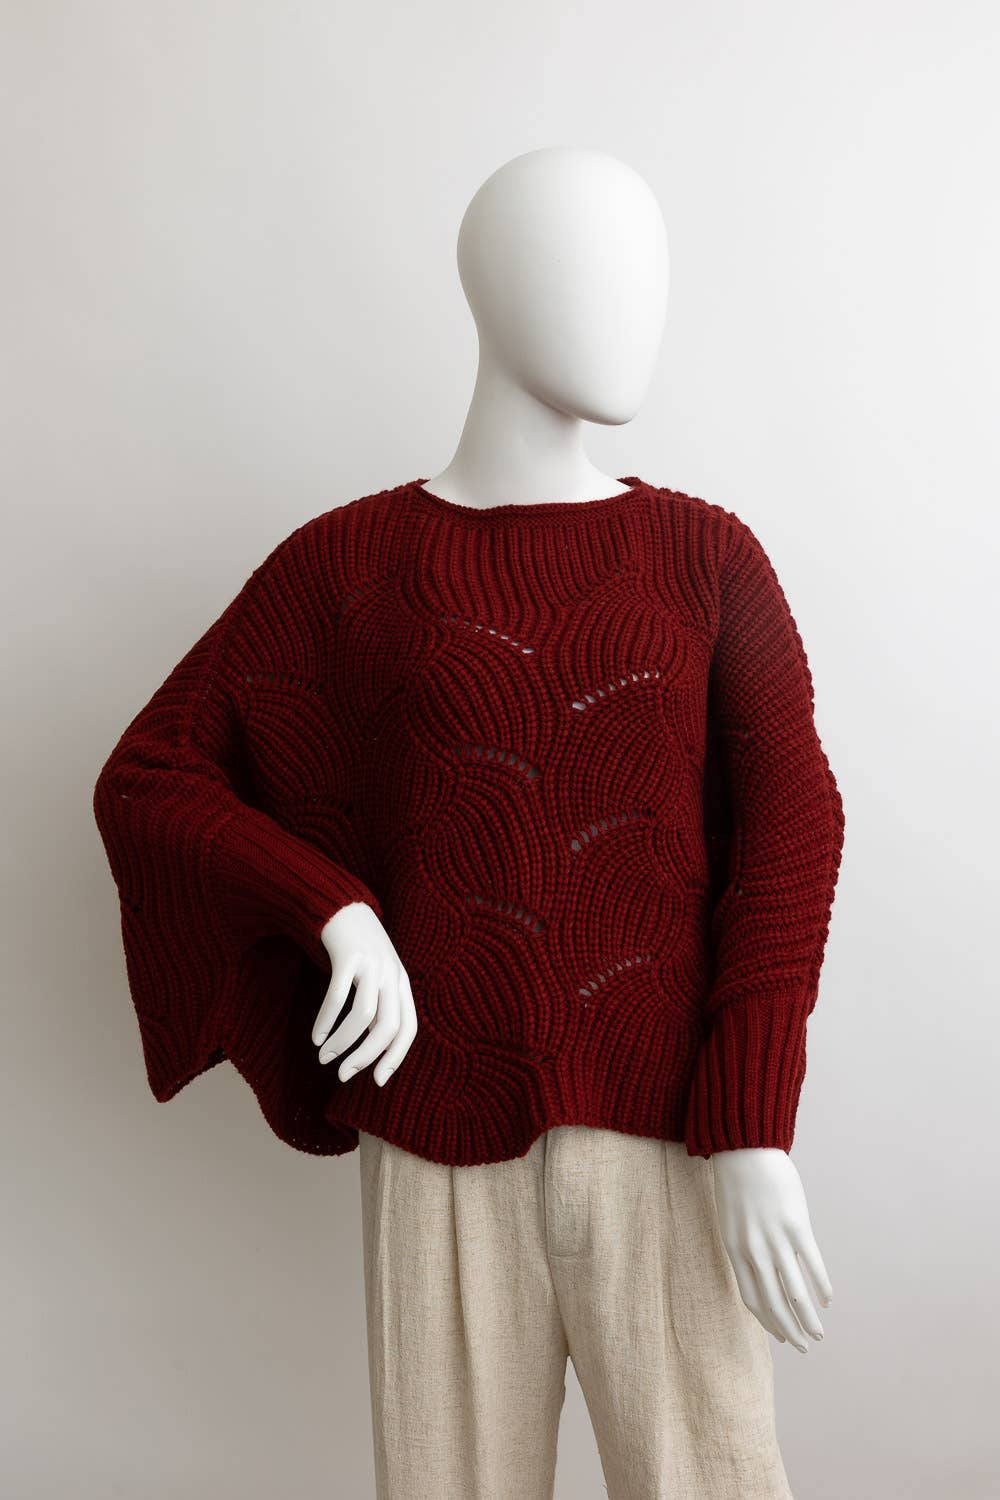 Ribbed Knit Pattern Poncho w/ Sleeves - Whimsical Details